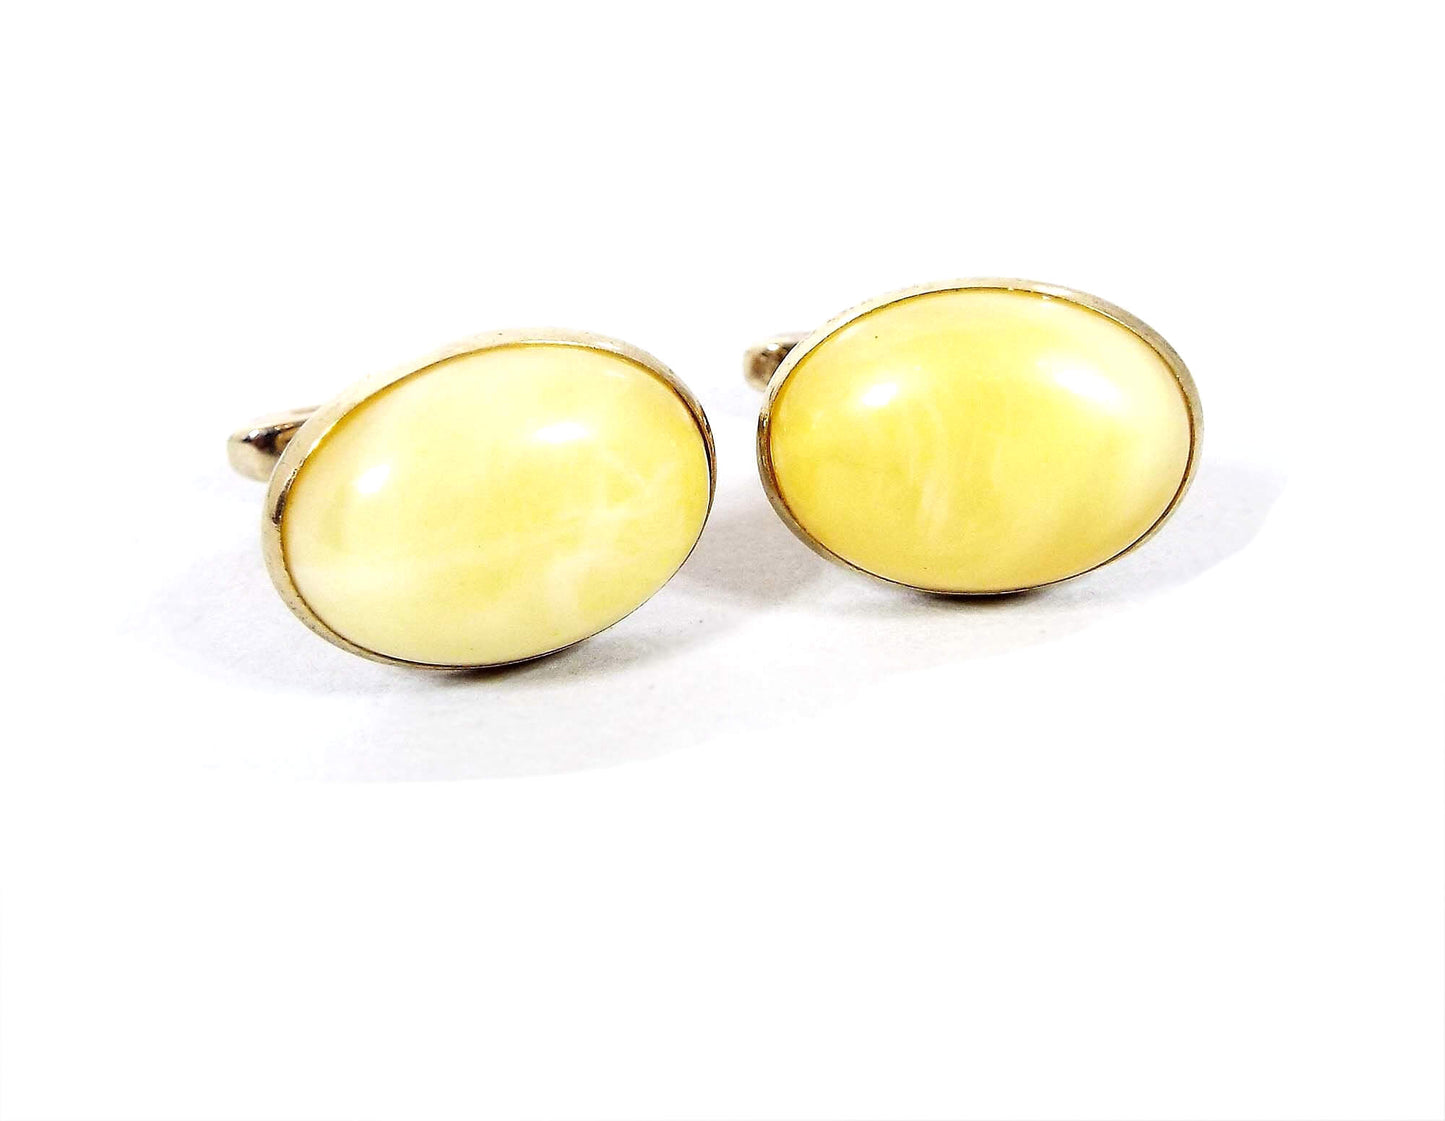 Hickok Yellow Lucite Vintage Cufflinks, Domed Cuff Links